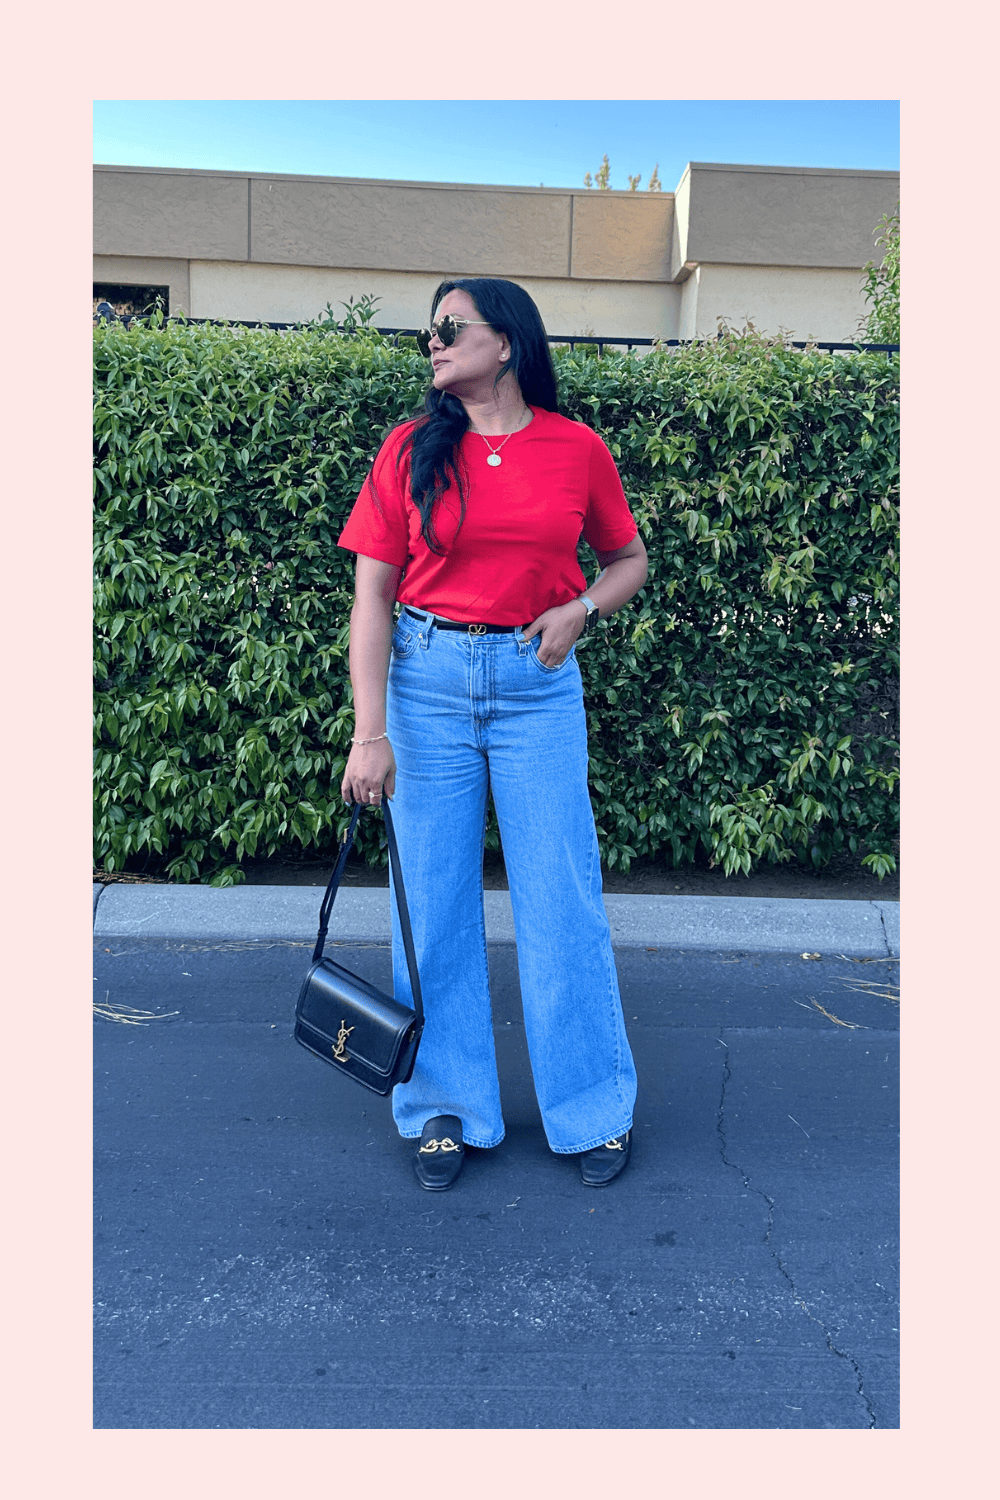 Red Tshirt and jeans outfit